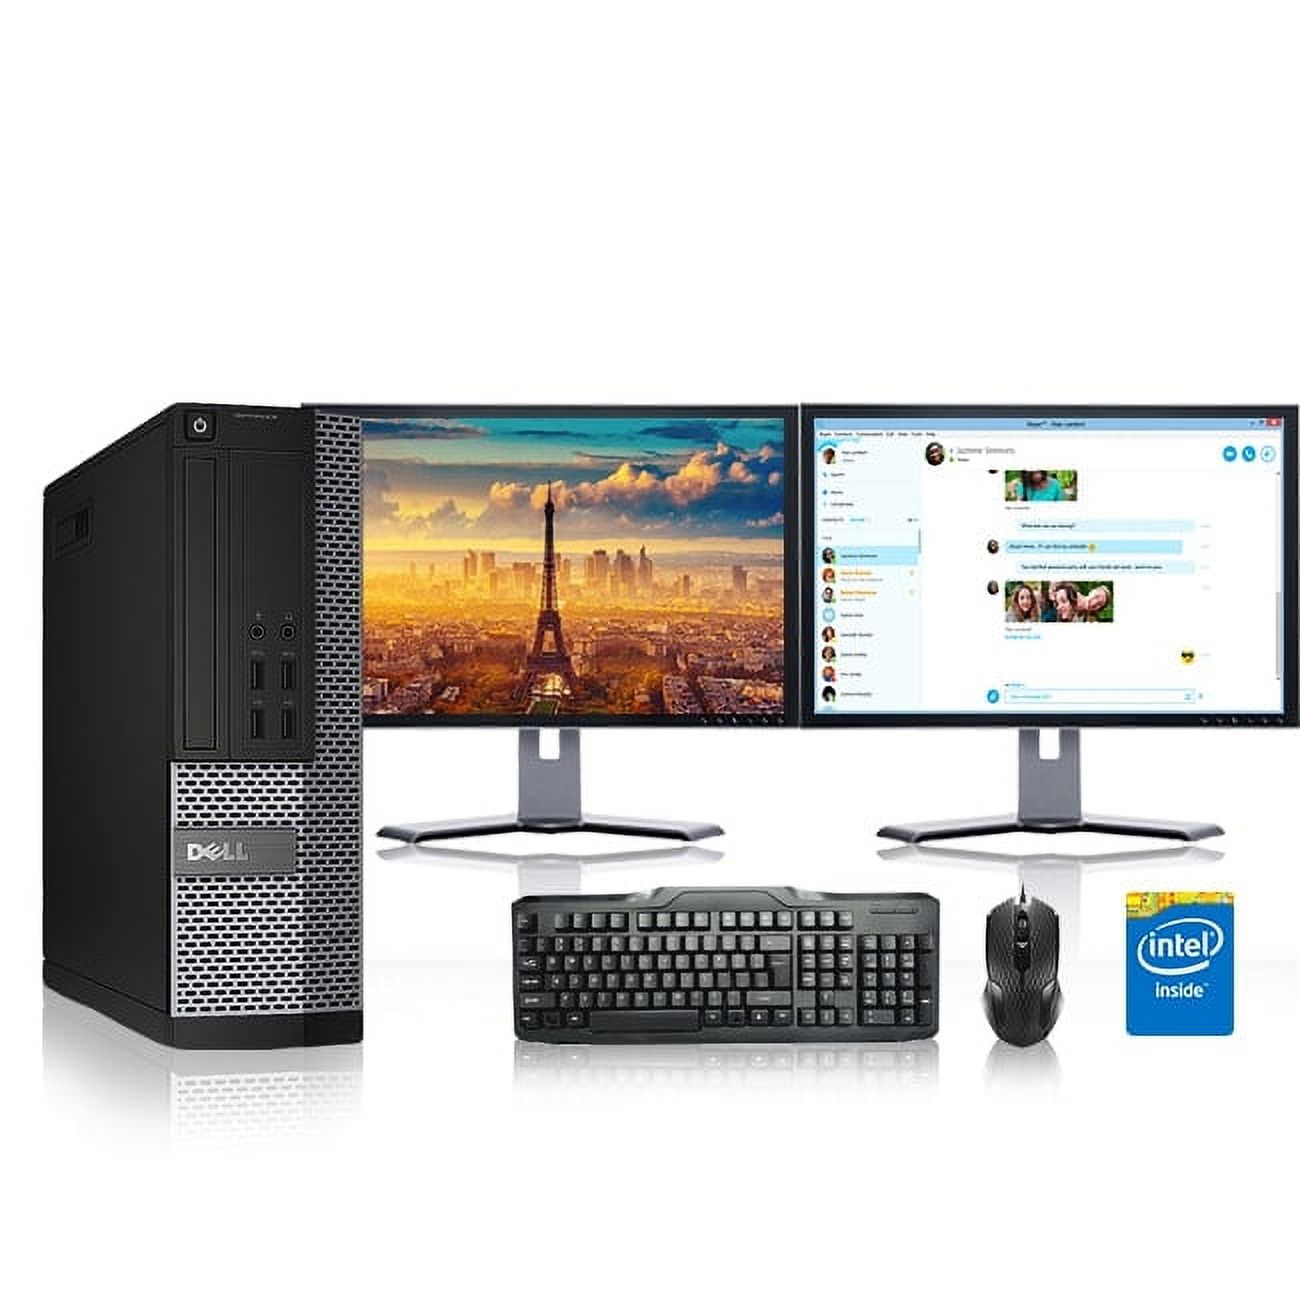 Restored Dell Optiplex Desktop Computer 2.8 GHz Core i7 Tower PC, 16GB, 2TB HDD, Windows 10 x64, 19" Dual Monitor , USB Mouse & Keyboard (Refurbished) - image 1 of 3